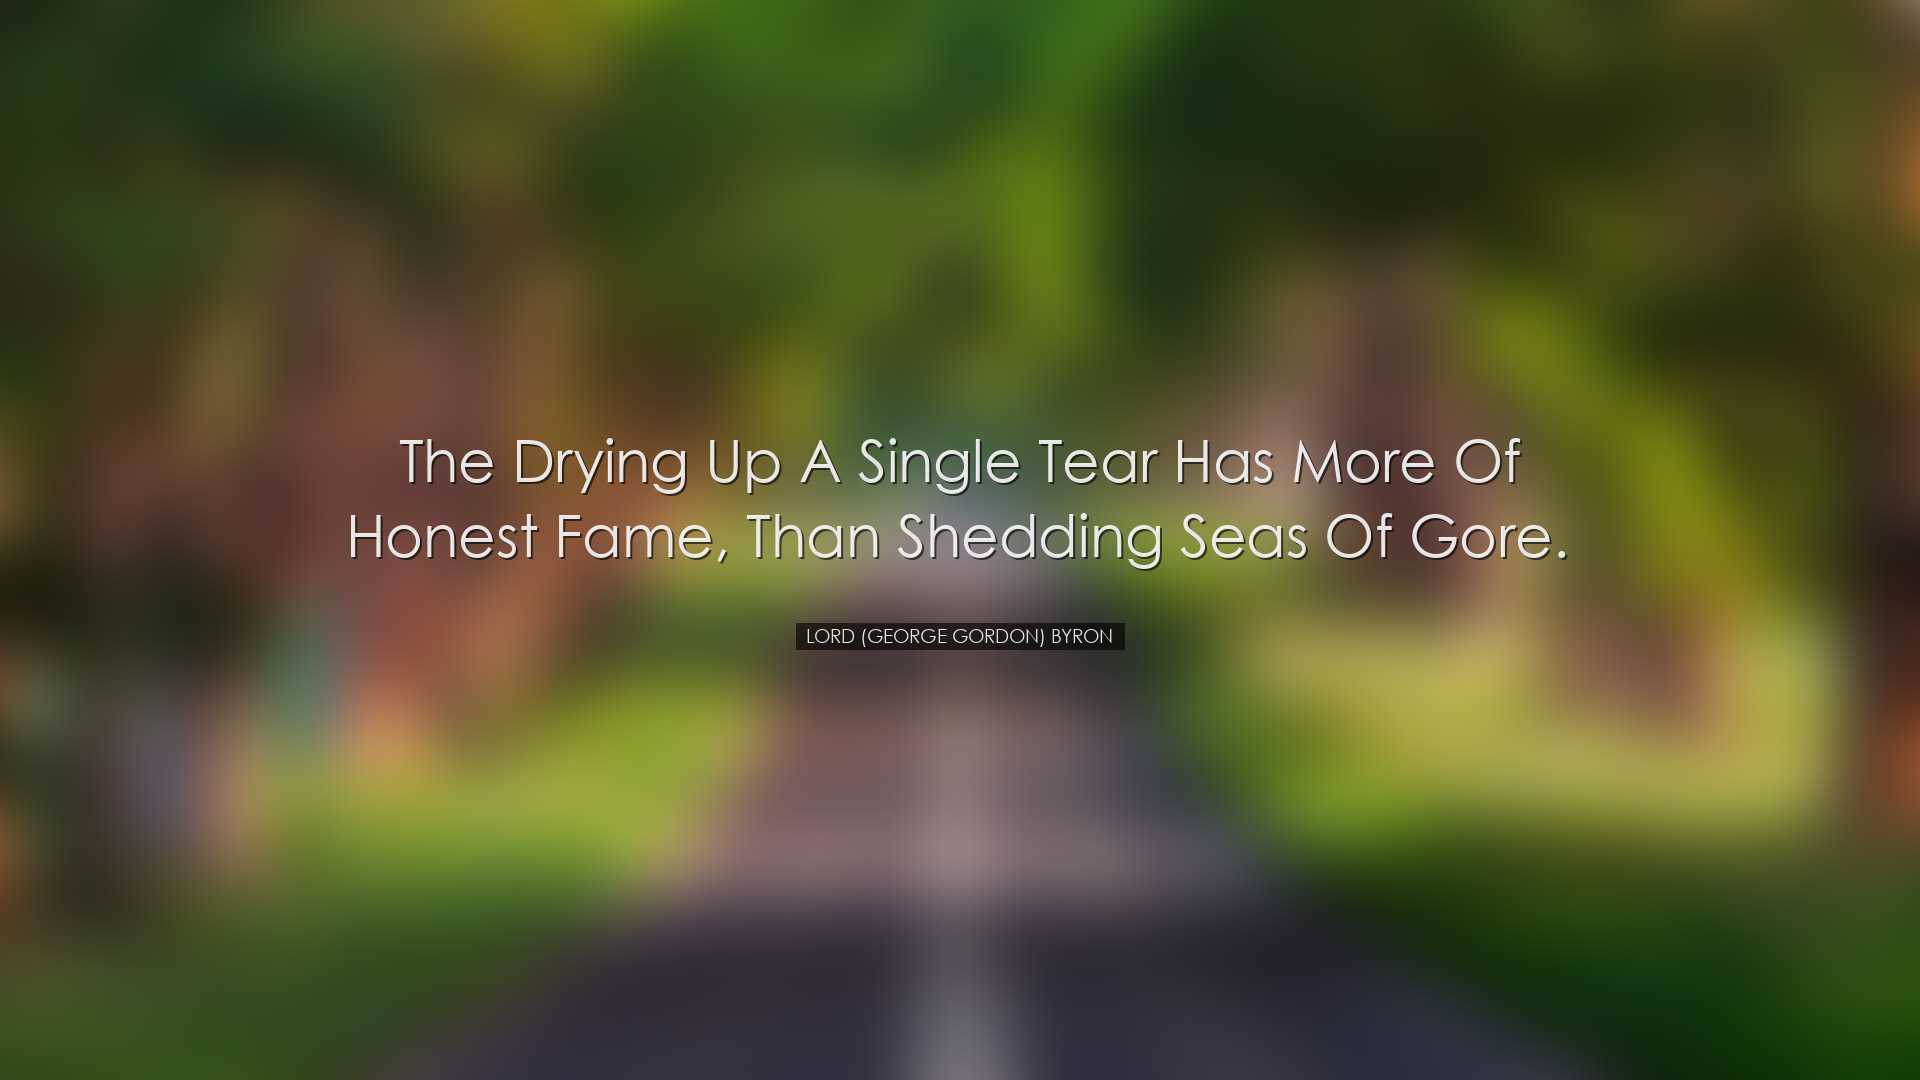 The drying up a single tear has more of honest fame, than shedding